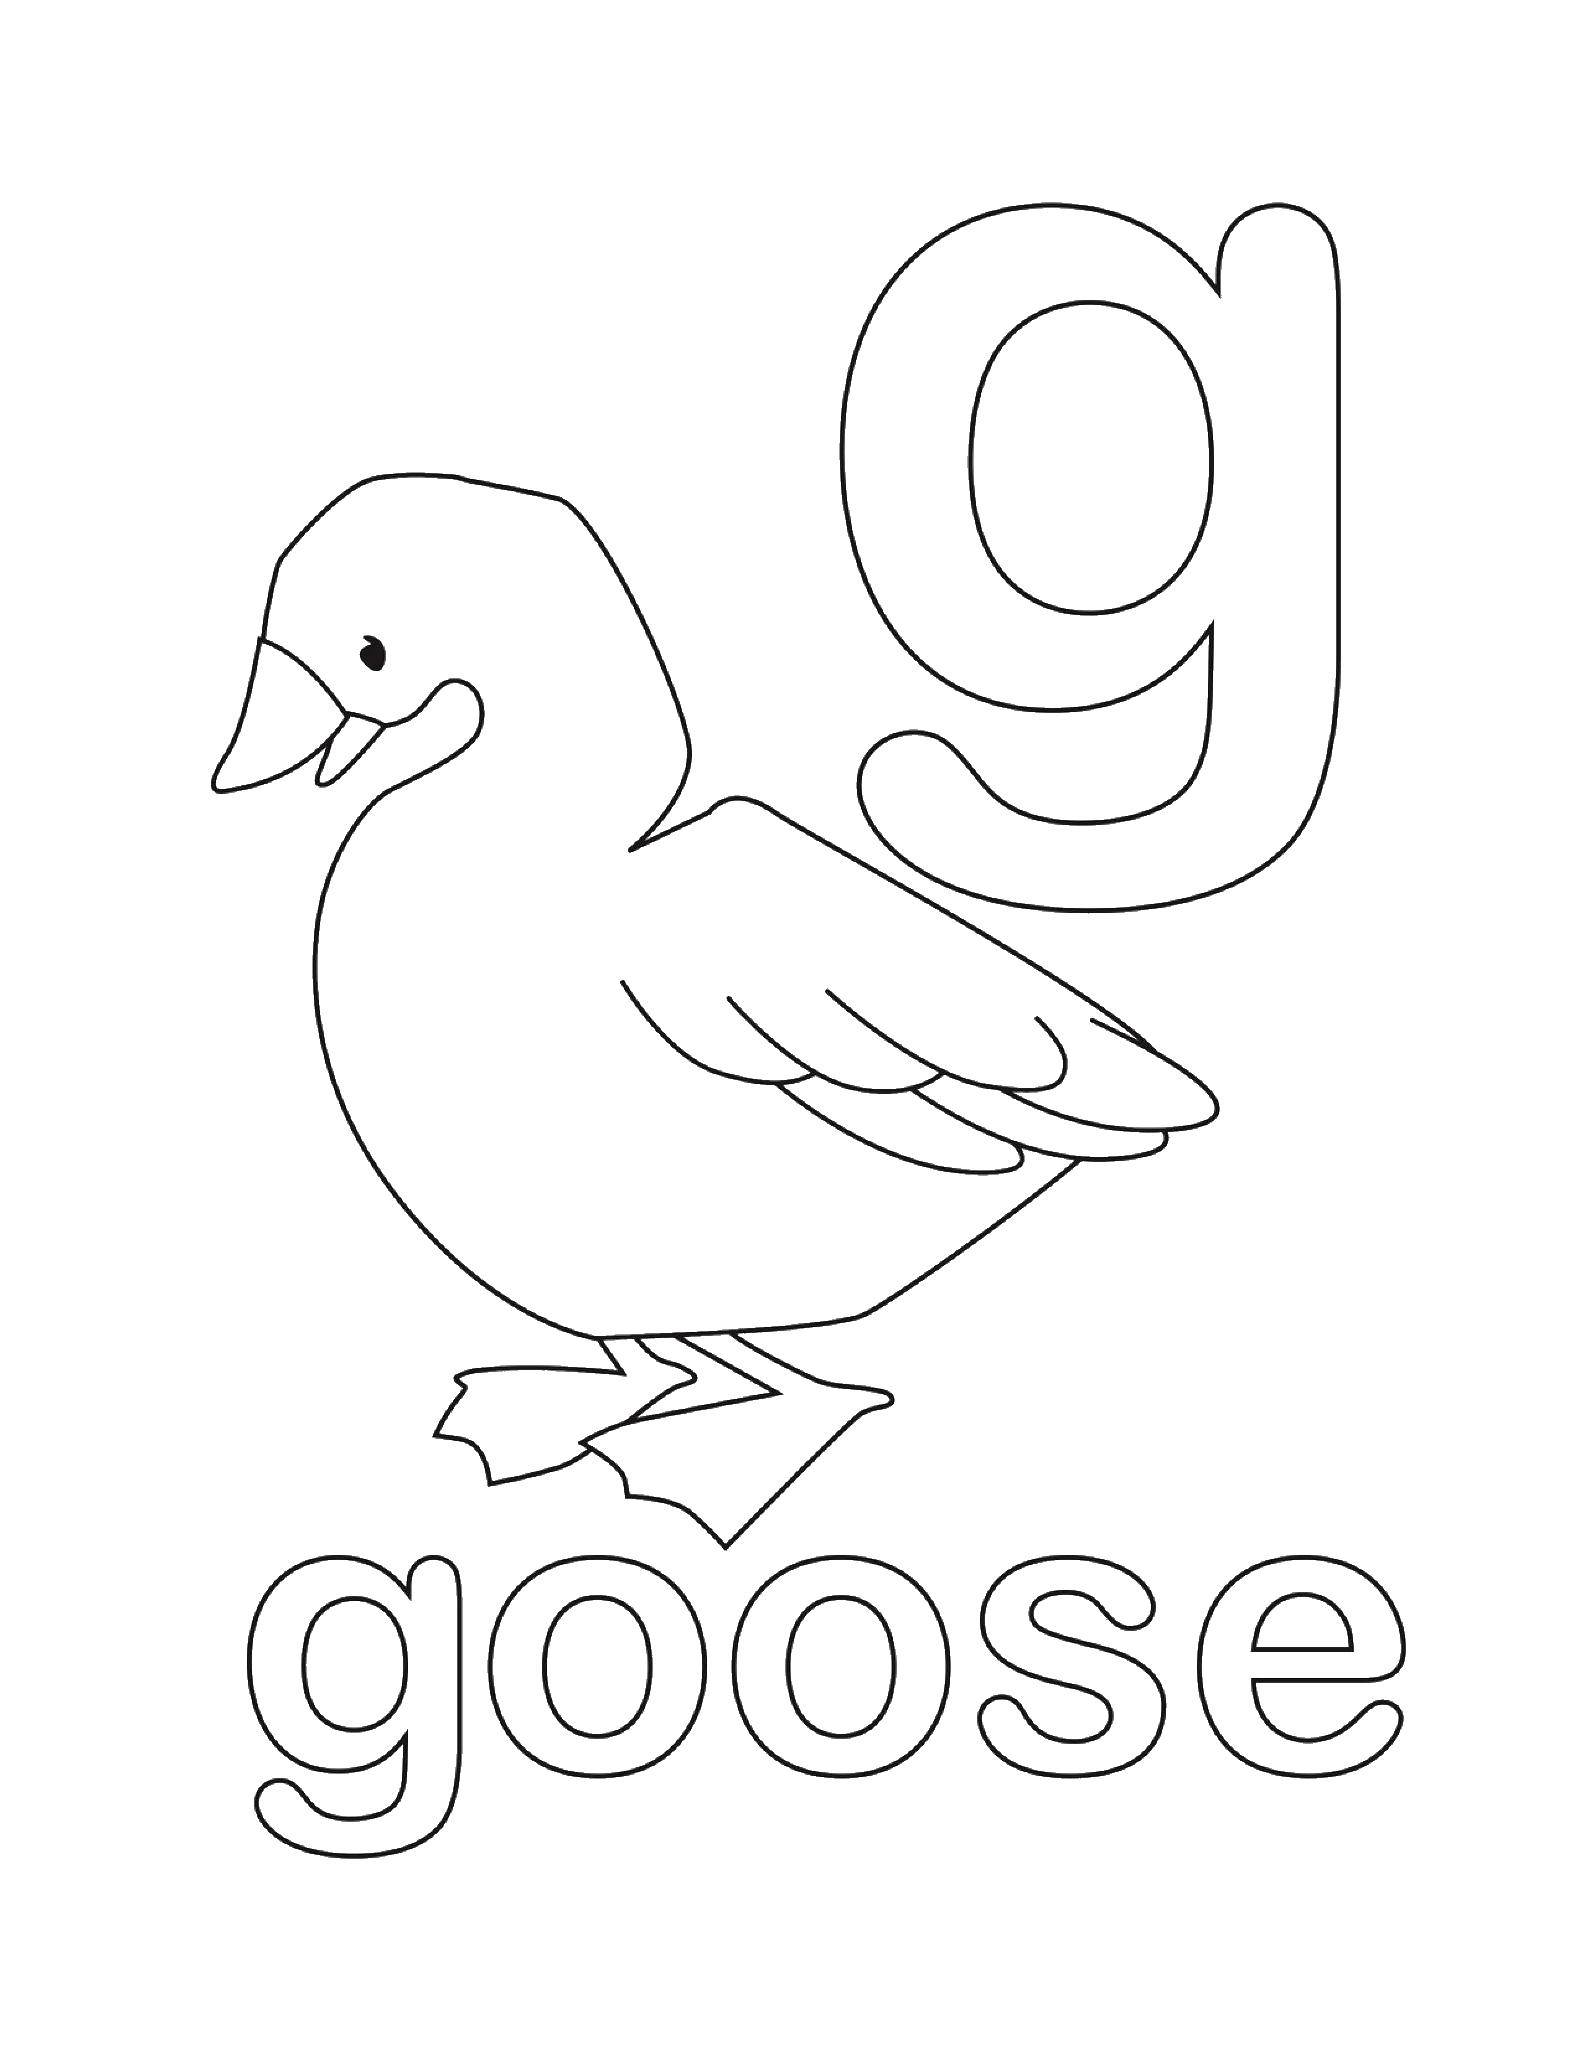 Coloring Goose. Category English words. Tags:  the English word goose.